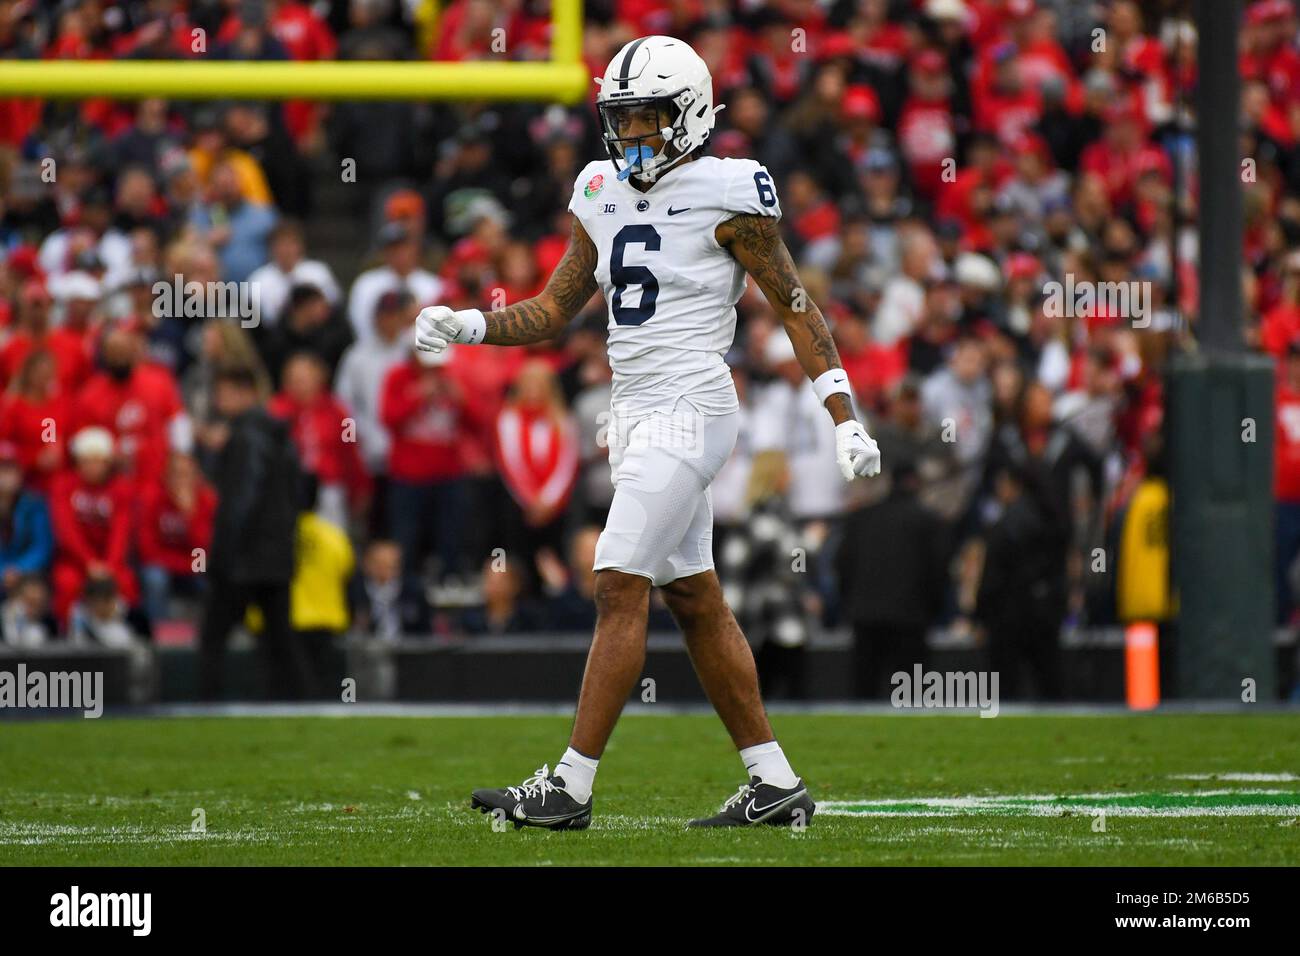 Penn State Nittany Lions wide receiver Harrison Wallace III (6) during the Rose Bowl game against the Utah Utes on Monday, Jan. 2, 2023 in Pasadena, C Stock Photo